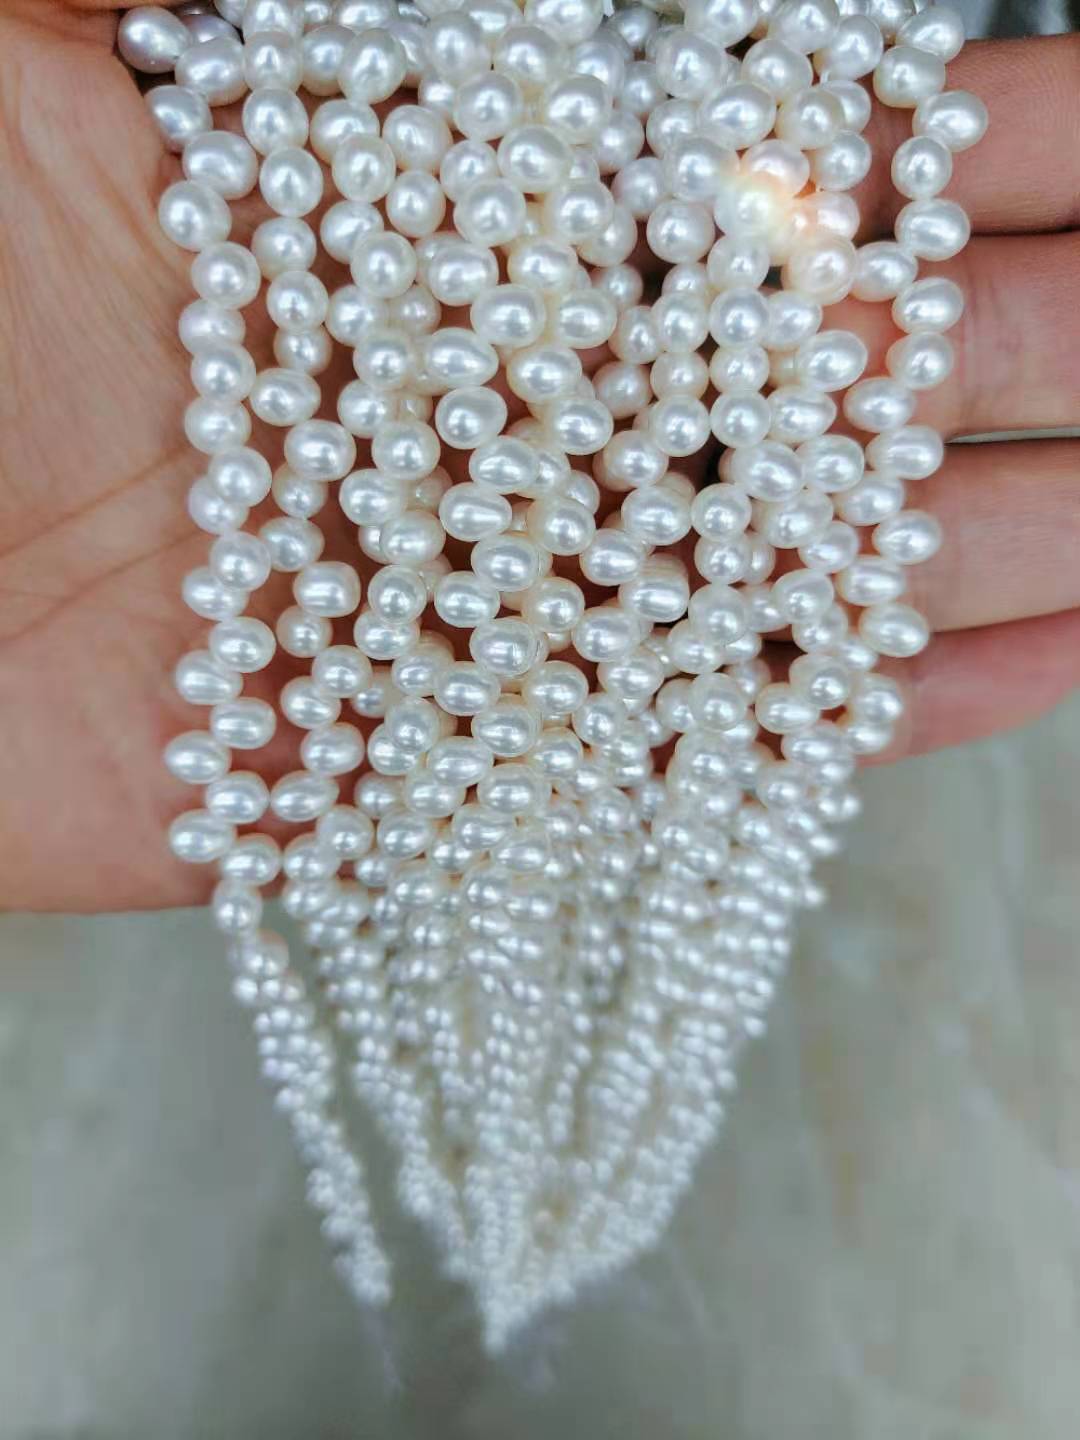 5-6 mm AAA rice pearl side hole Raw Pearls nature pearl loose Pearl suppliers and wholesale freshwater pearl with farm direct prices